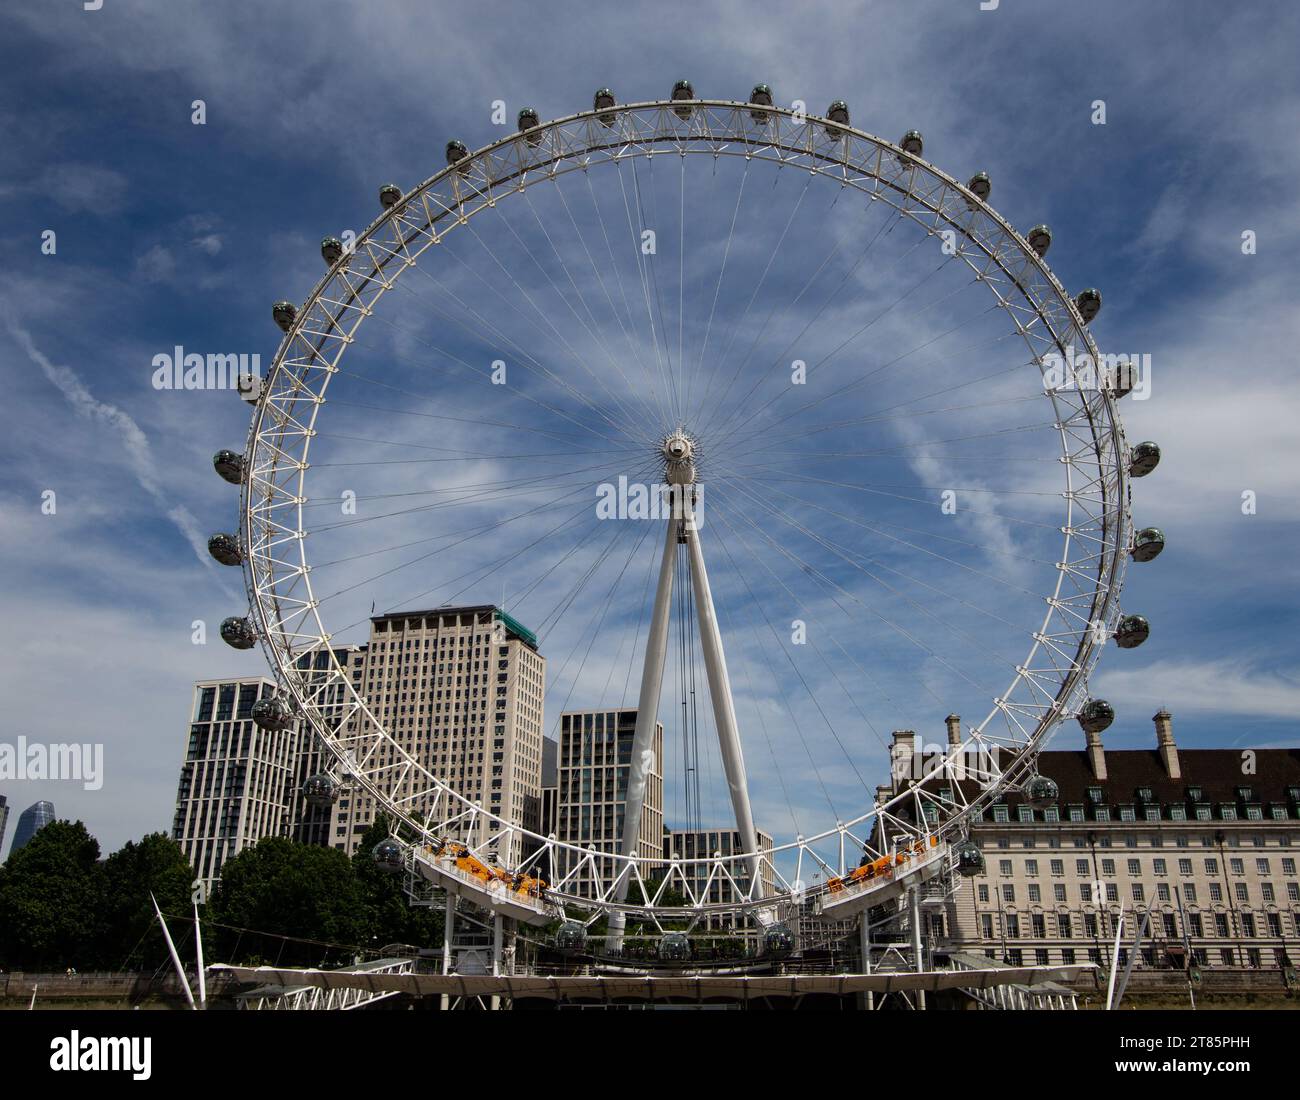 Wide-angle shot of London Eye ferris wheel with passenger capsules against a cloudy sky Stock Photo